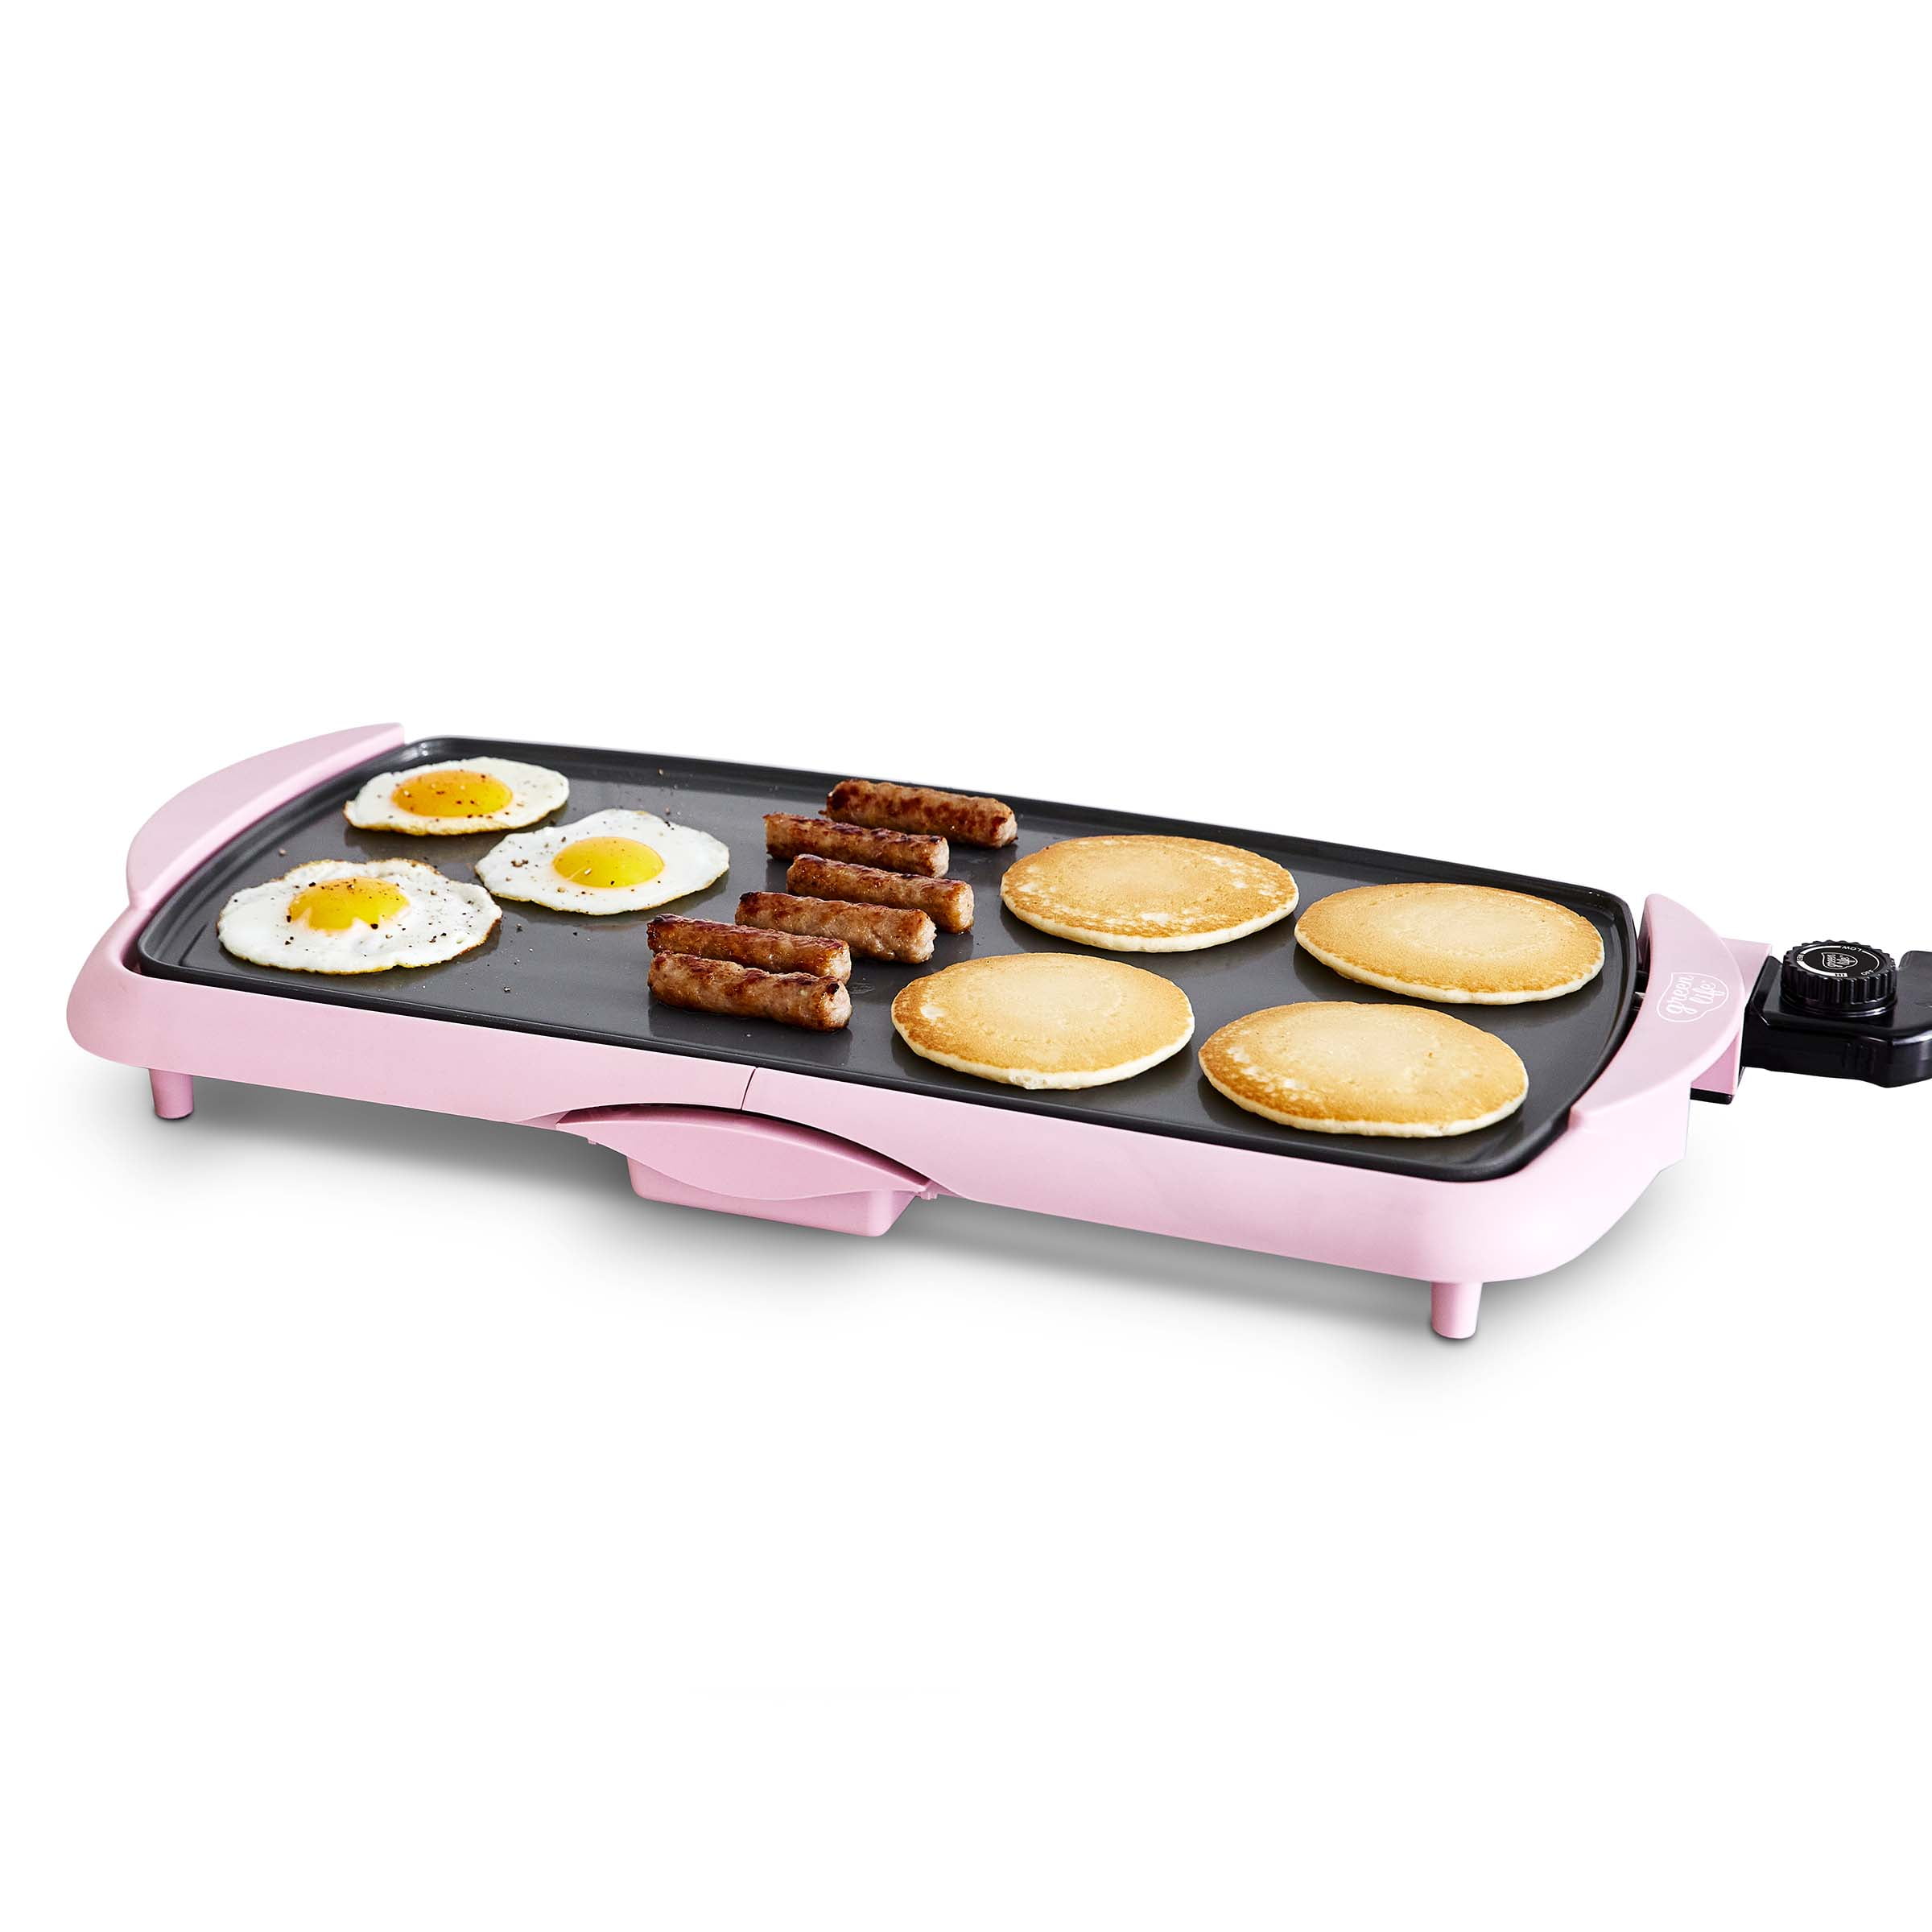 Bella 10.5'' x 20'' Family Size Electric Griddle